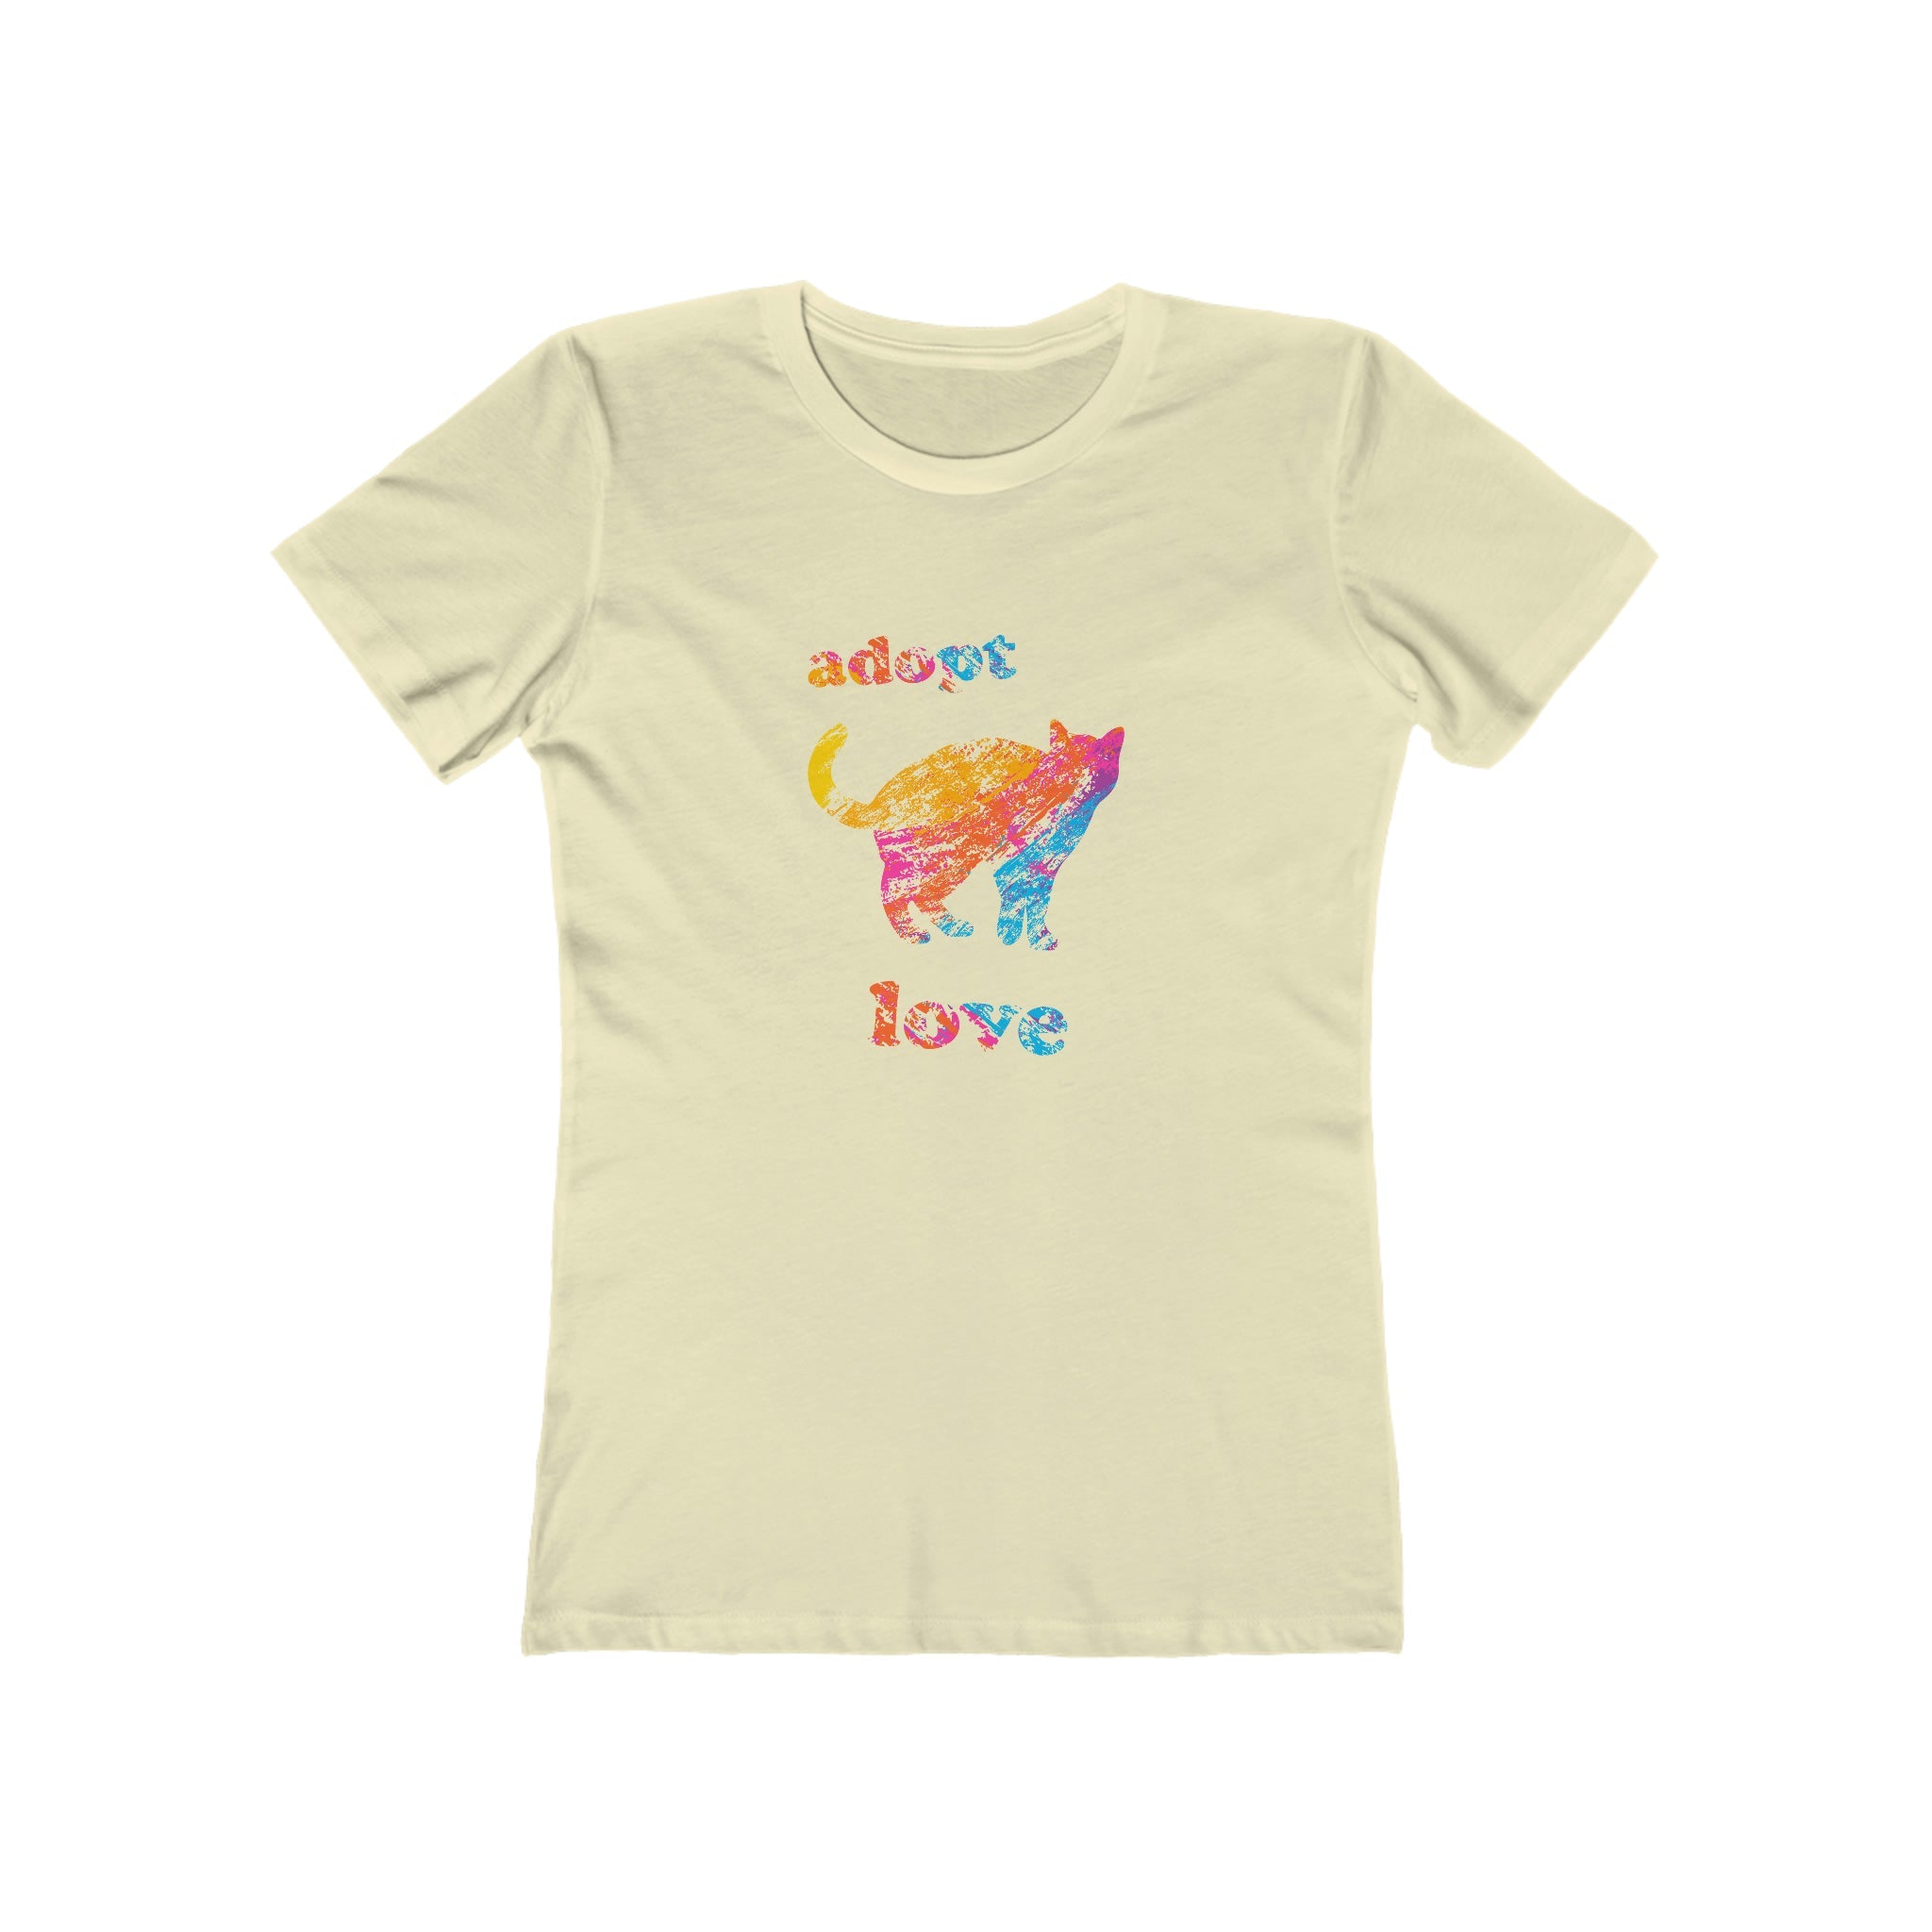 Adopt Love Cat with Colour Lettering : Women's 100% Cotton T-Shirt - Supporting Humane Animal Shelters